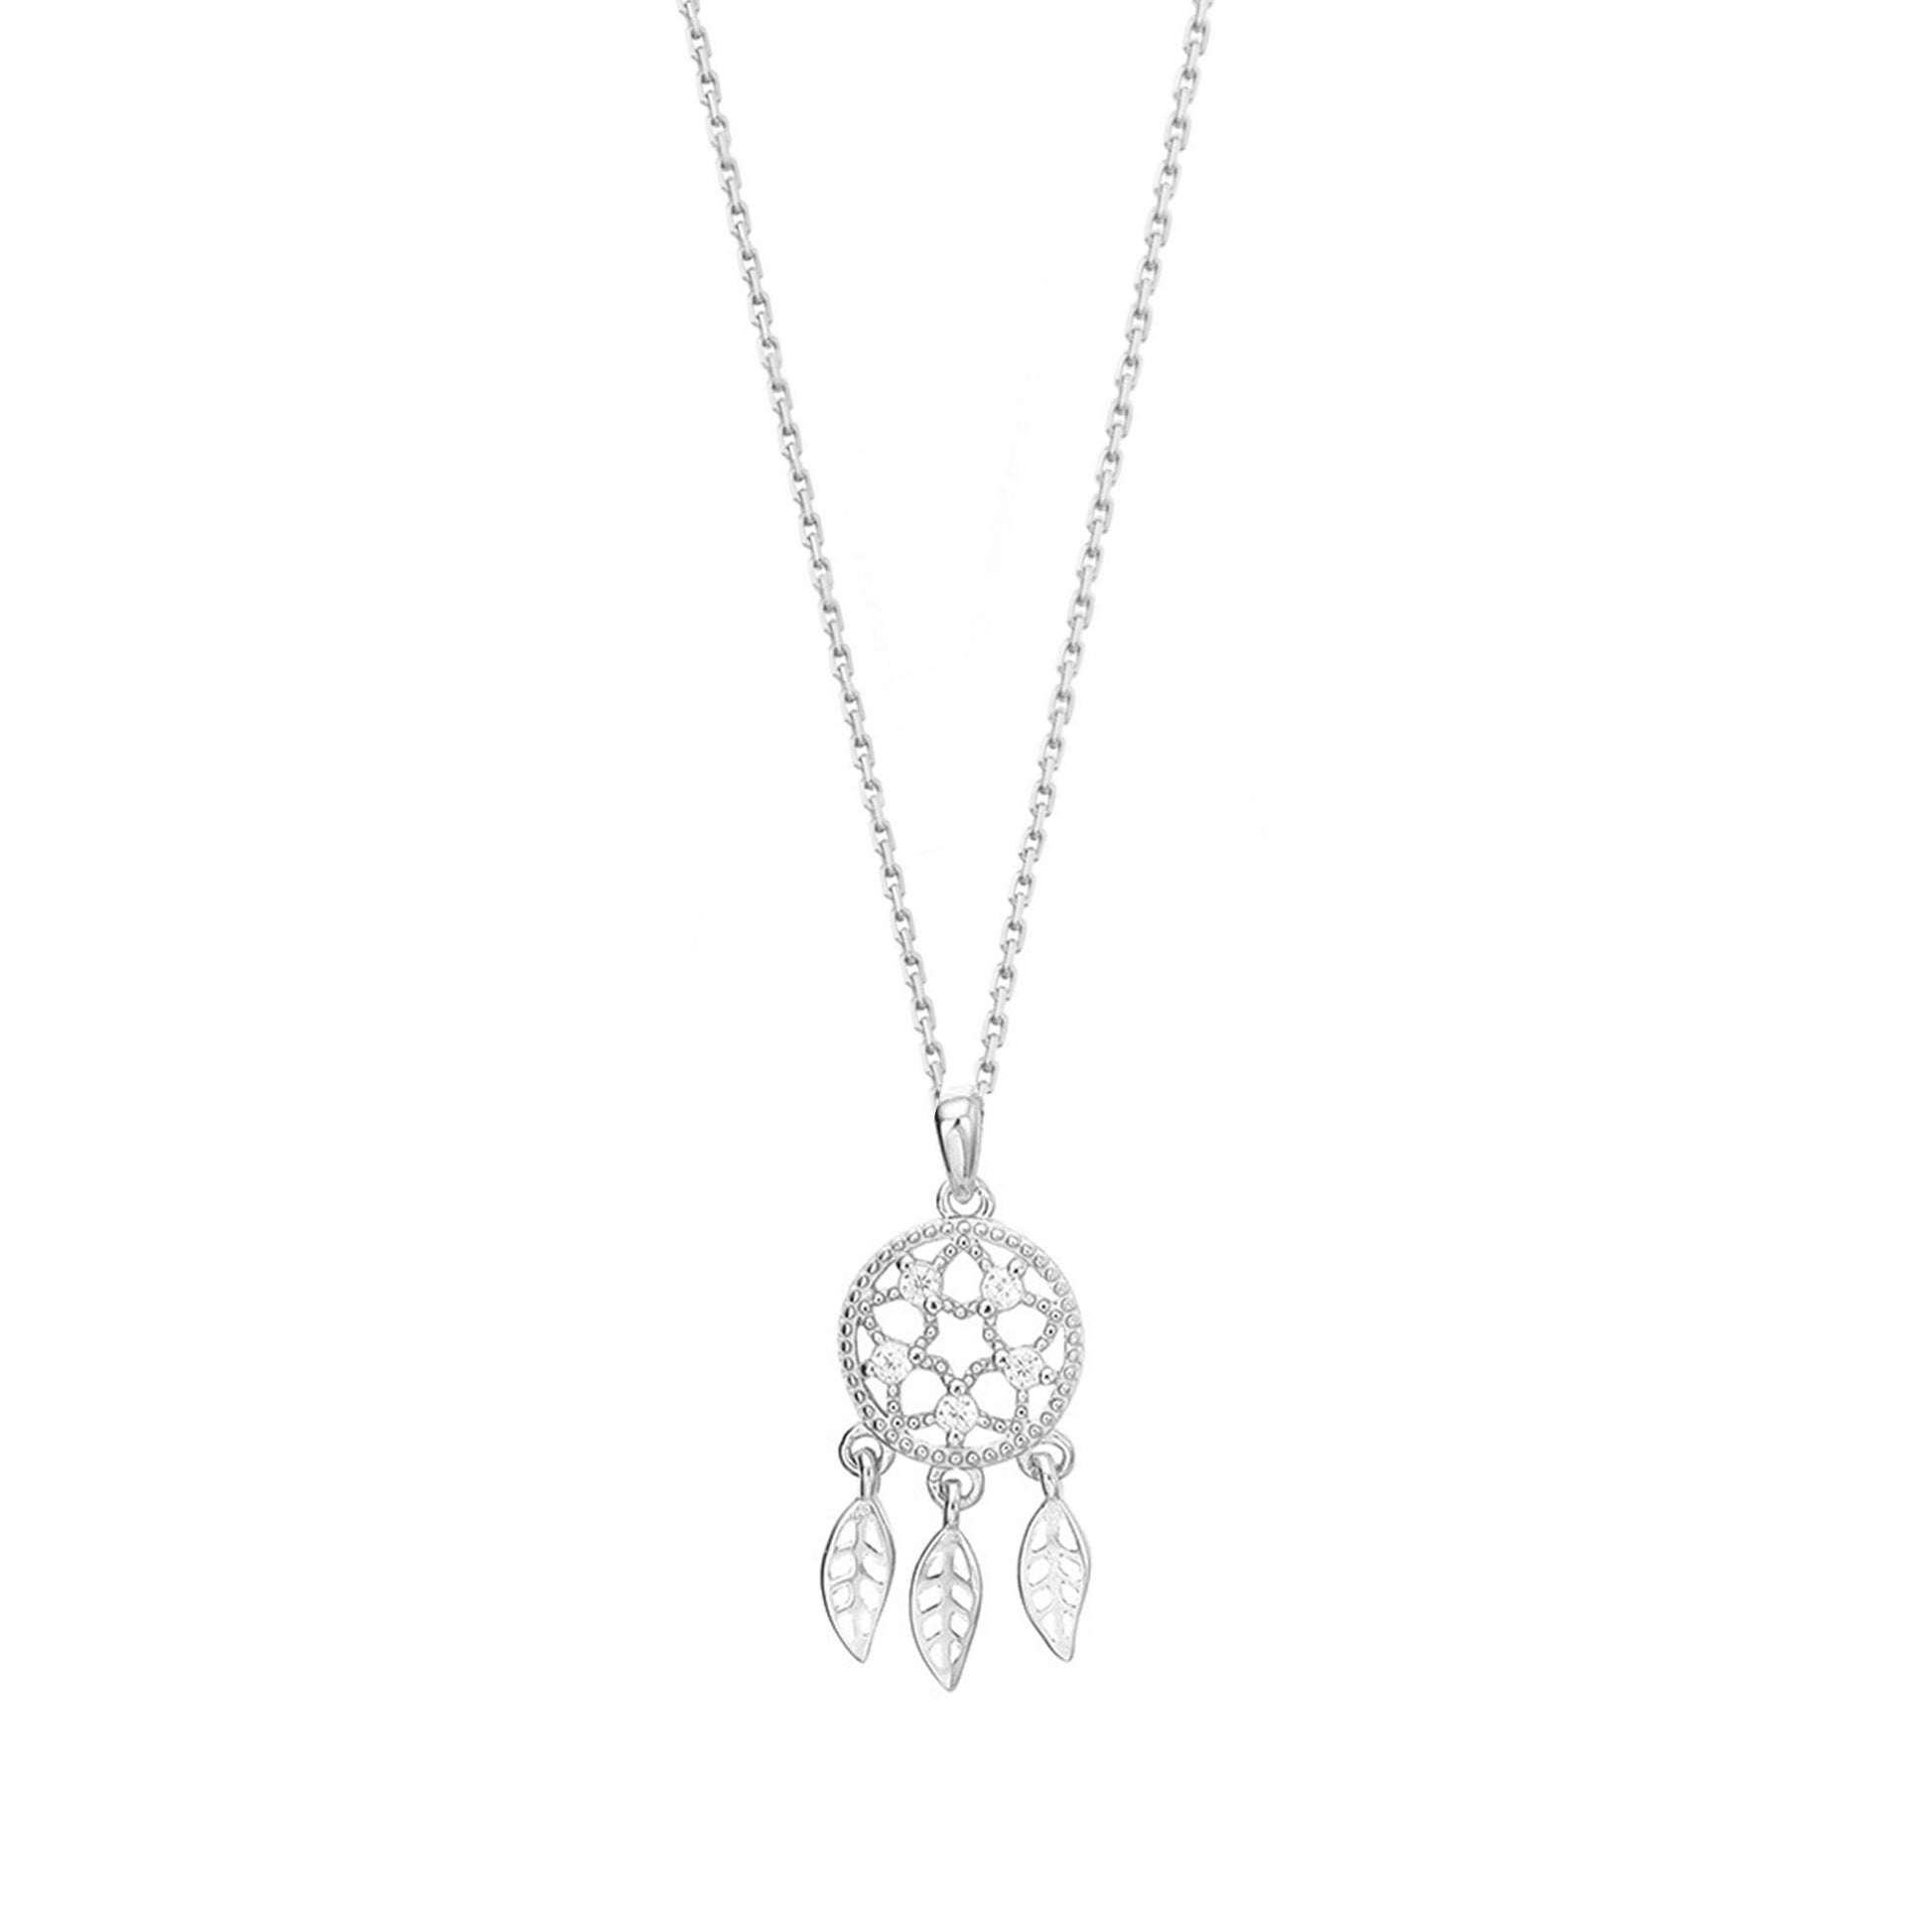 Sterling Silver Dreamcatcher Necklace With Crystal CZ Protection Jewellery - sugarkittenlondon